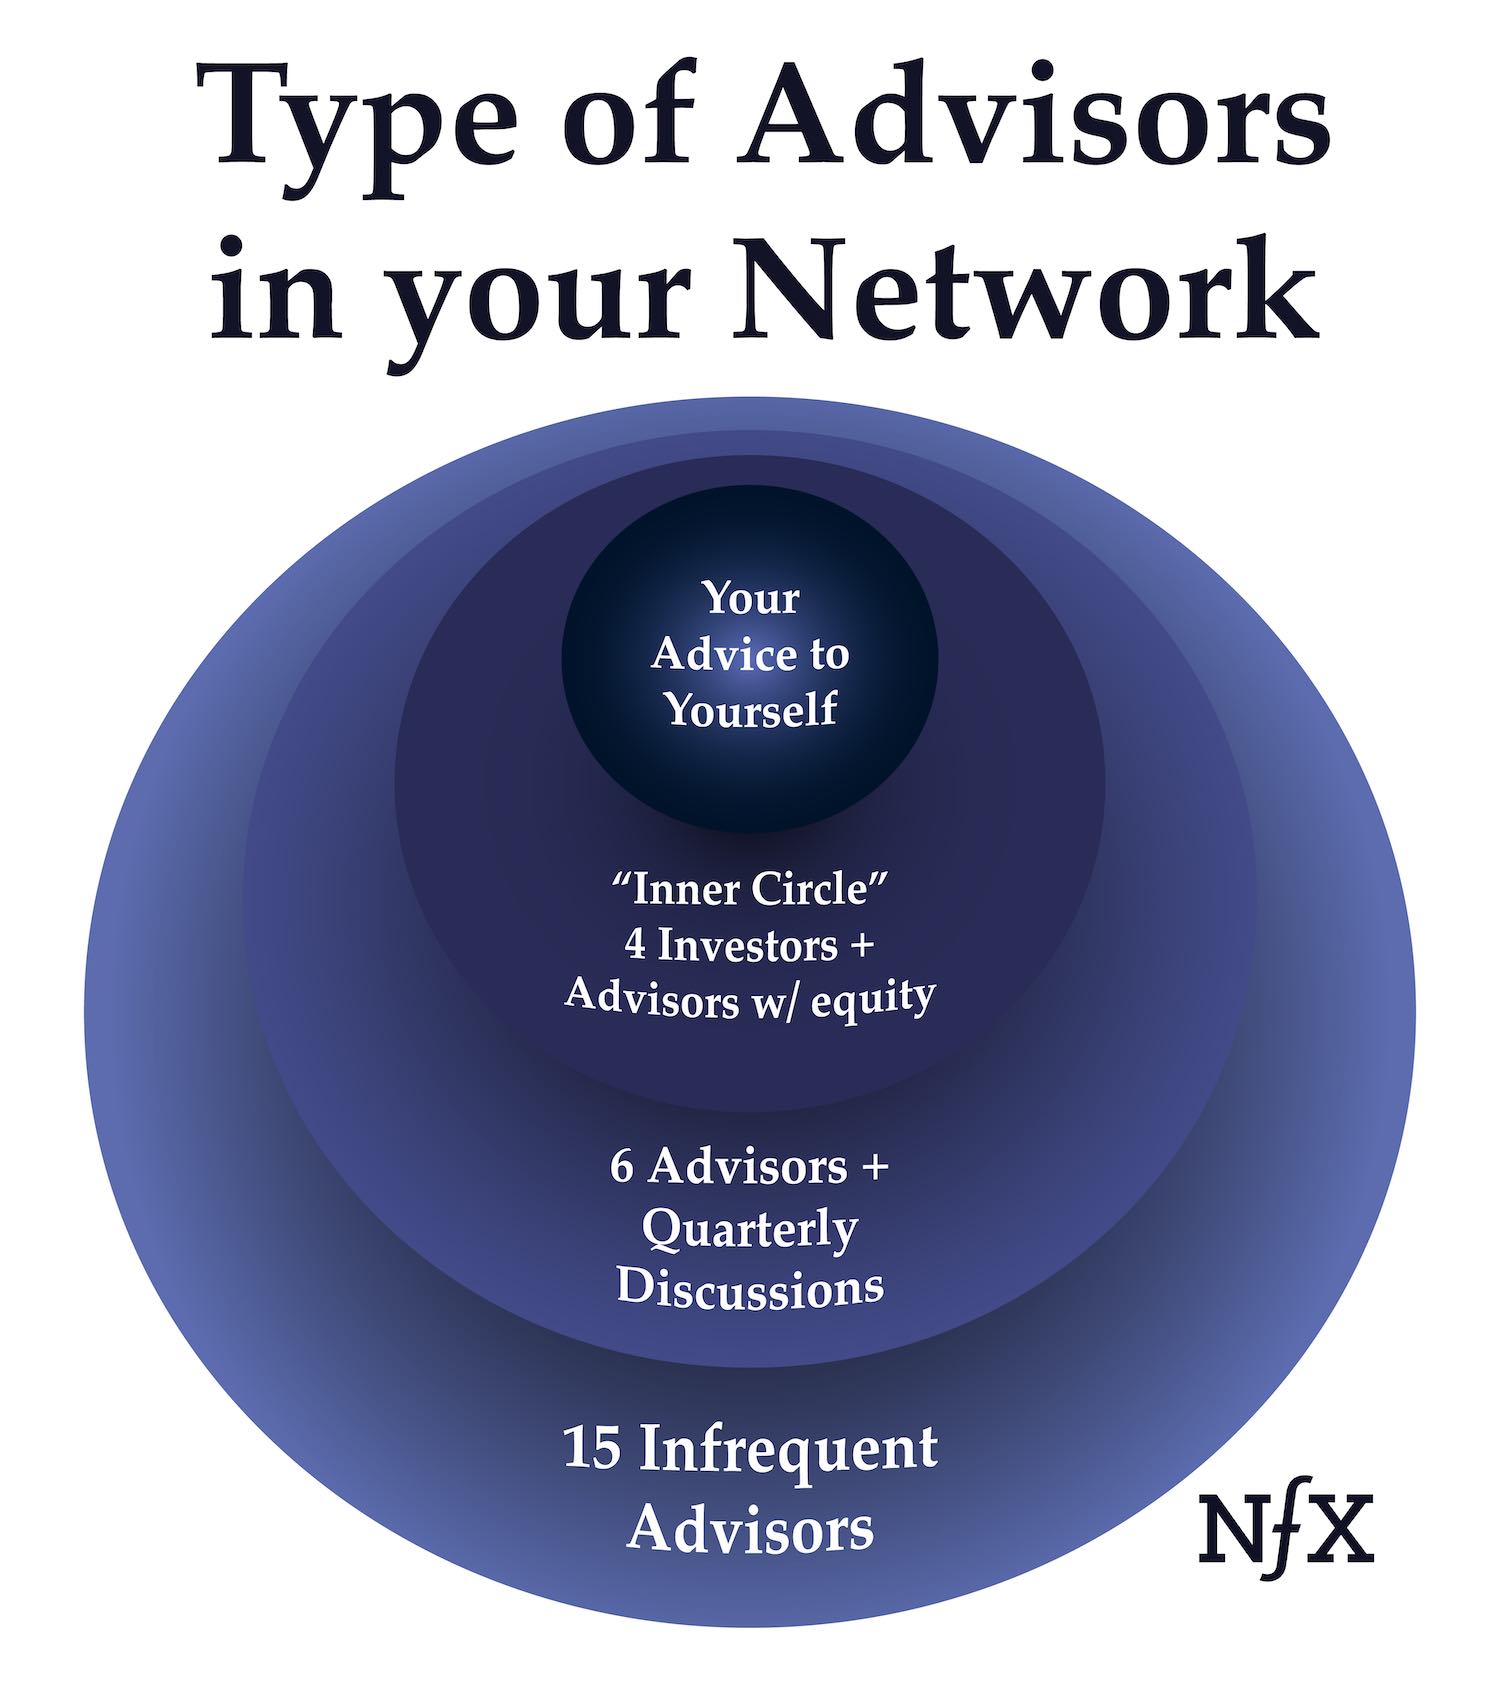 Type of Advisors in Your Network